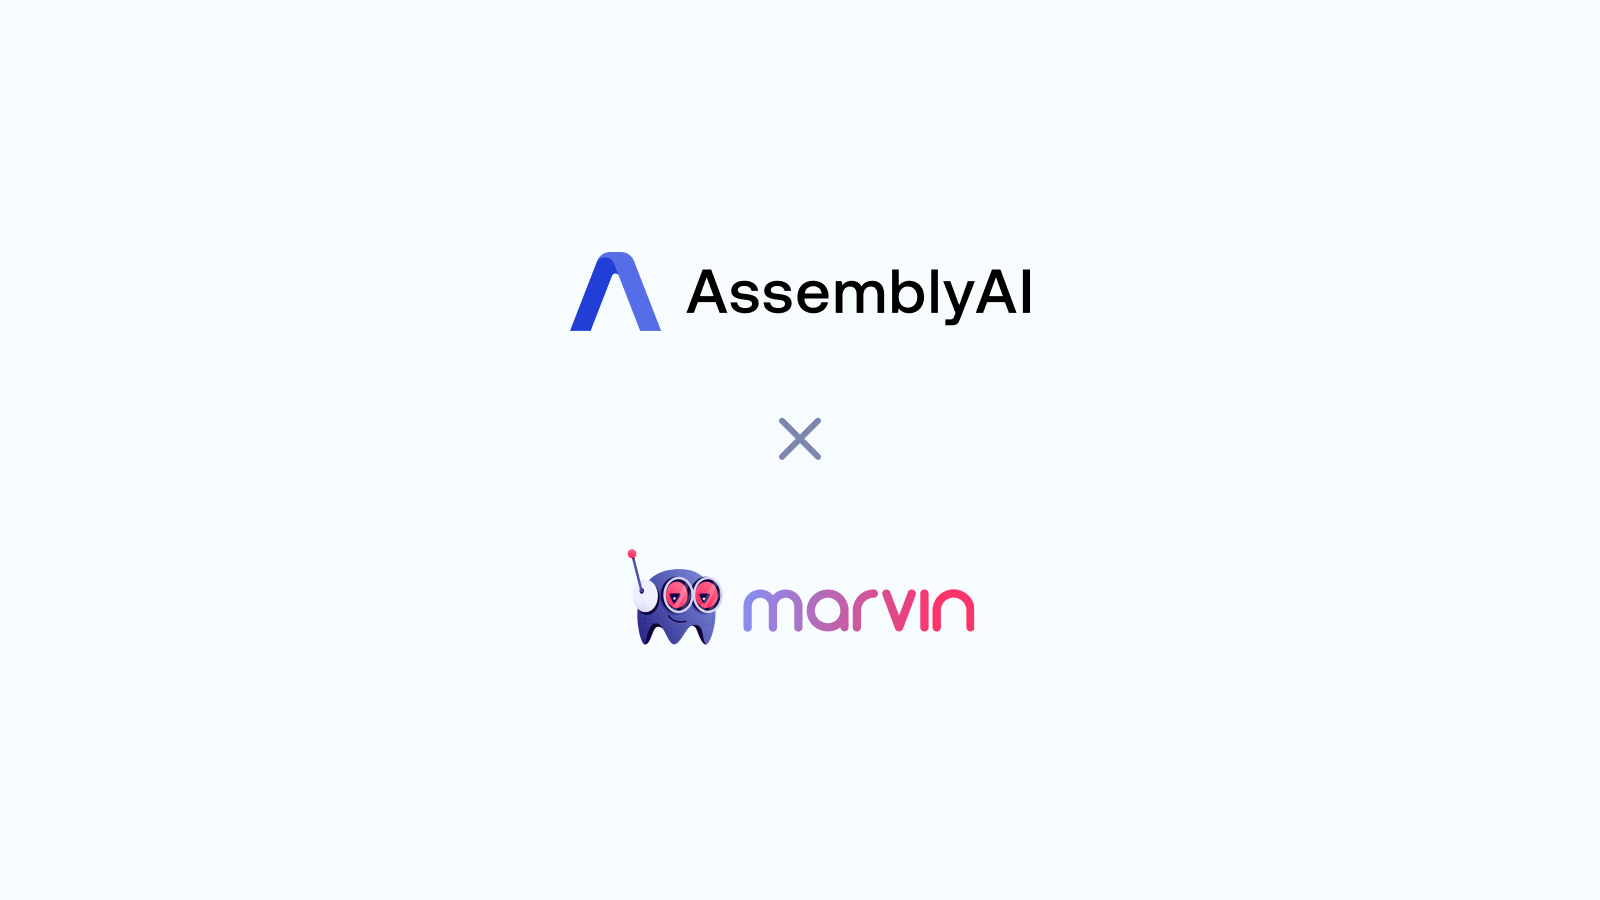 MARVIN — From exploratory A.I. models to production, by Marvin AI